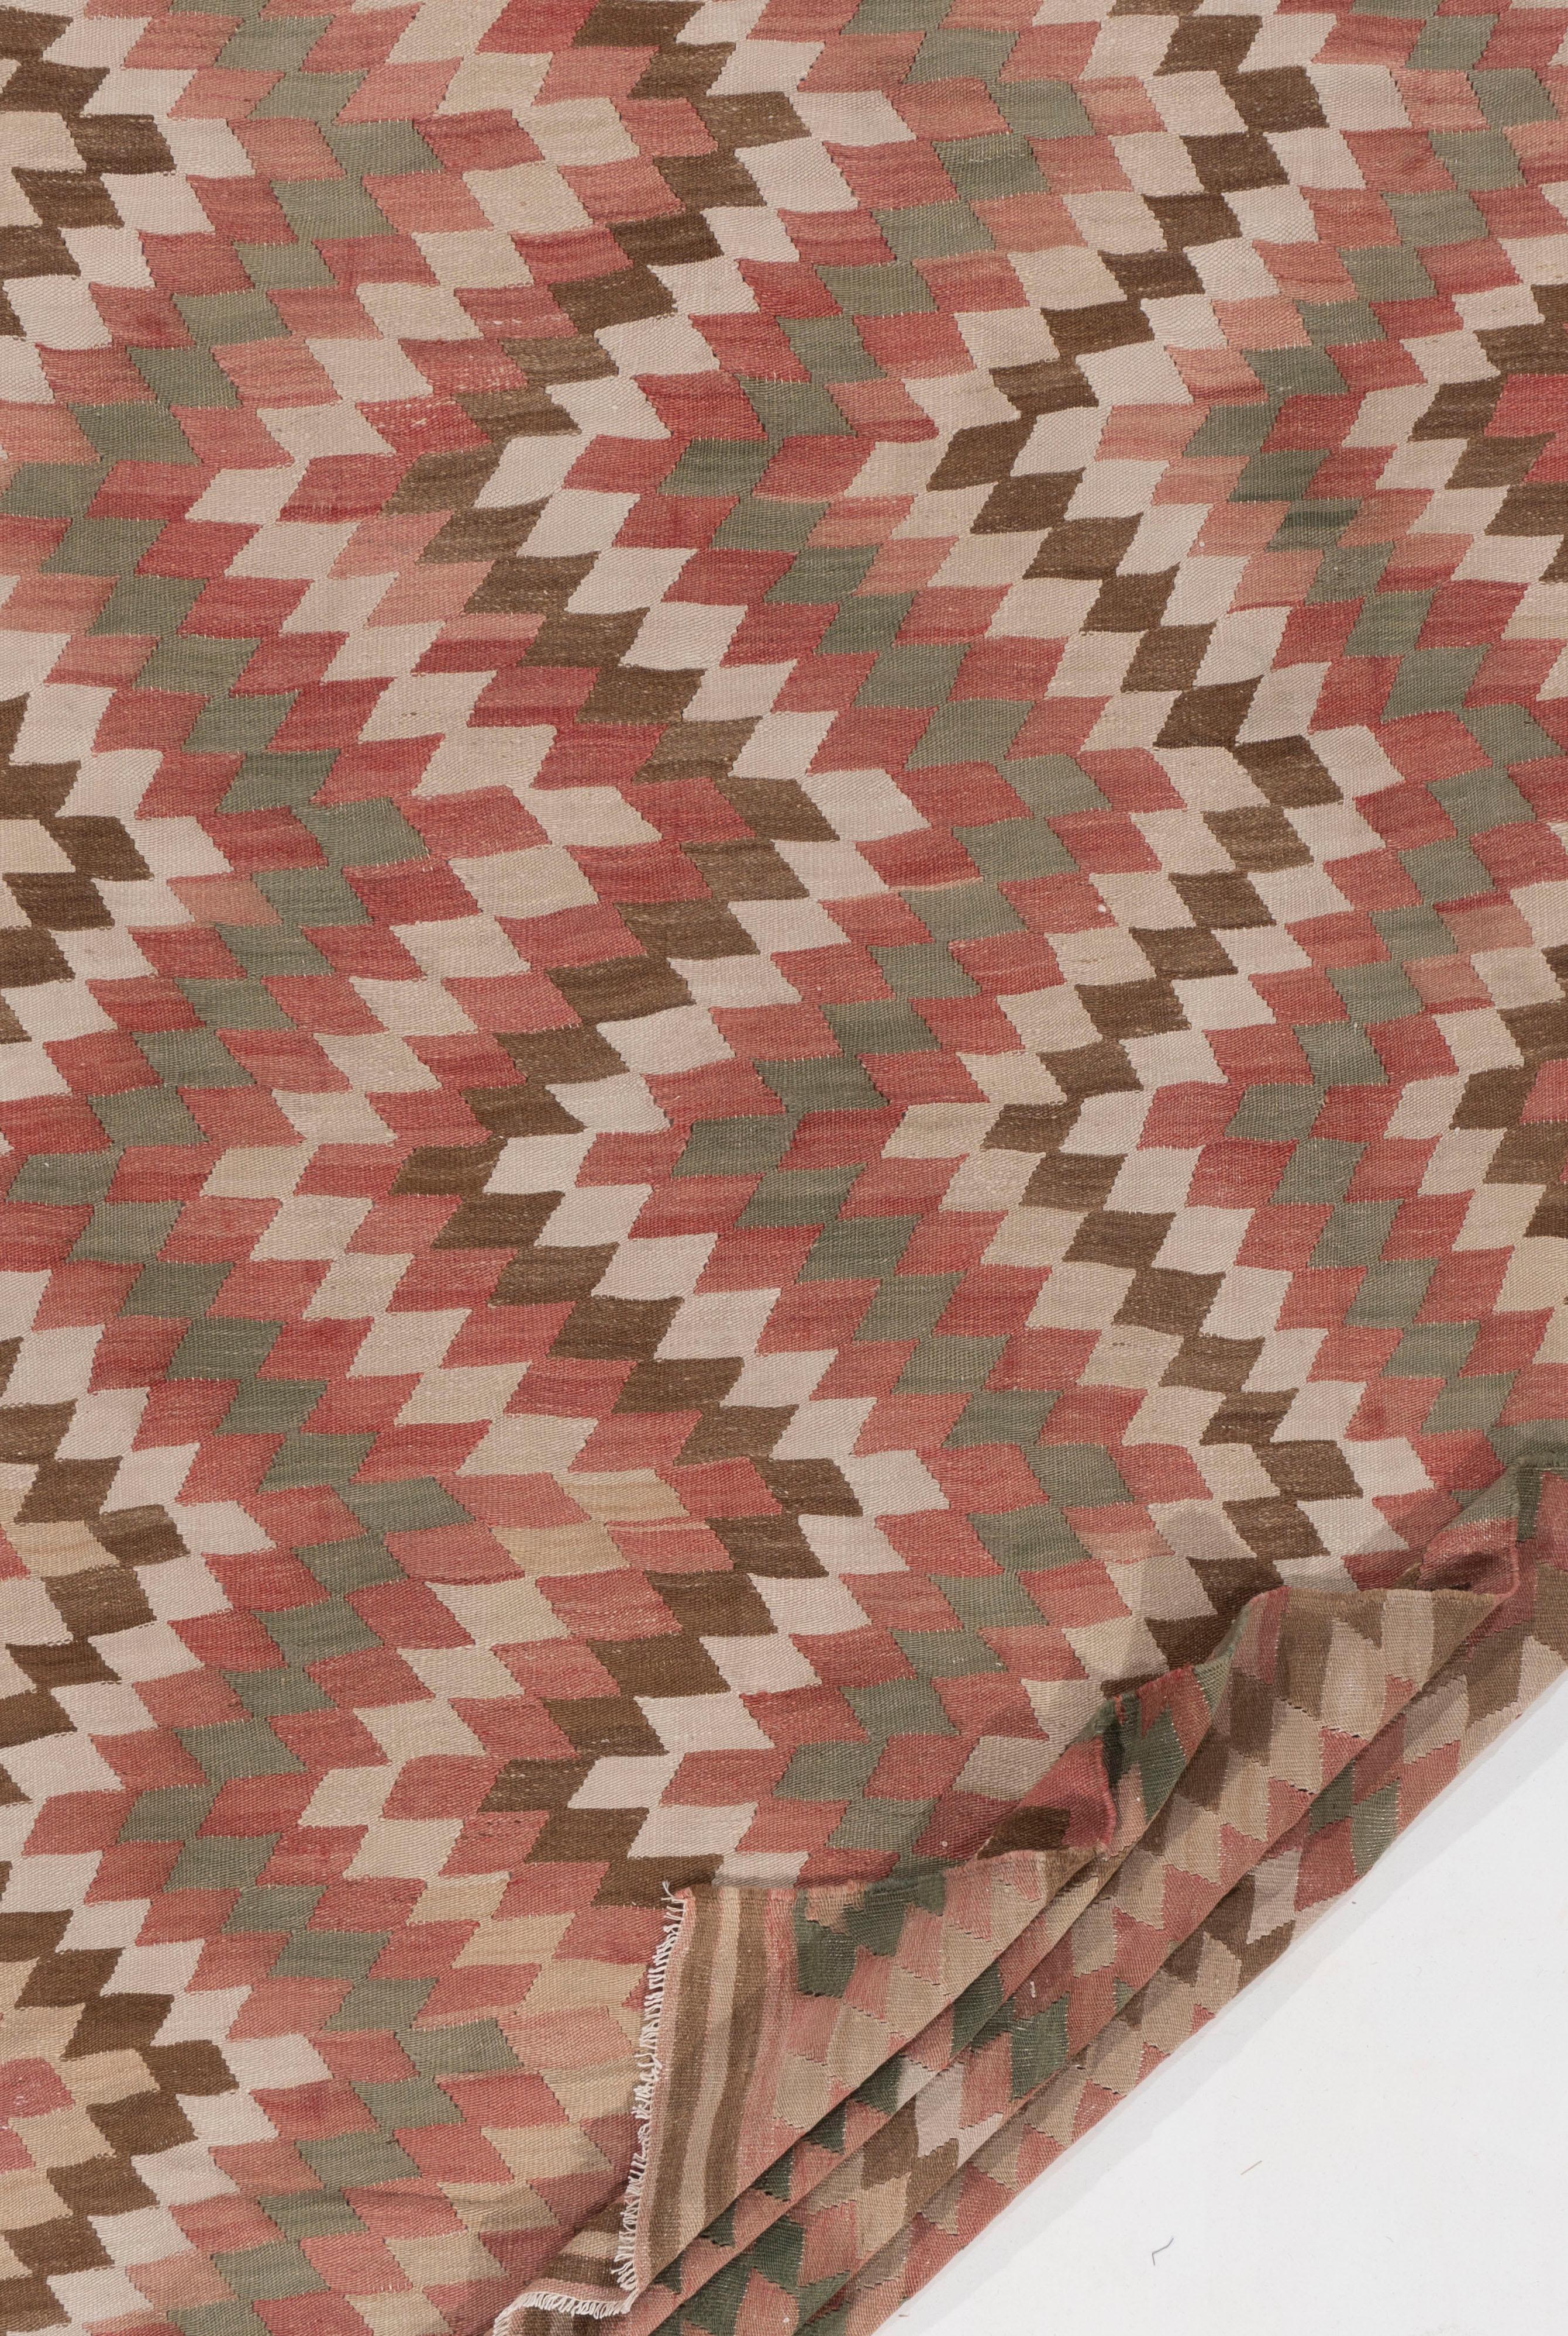 Vintage Turkish Kilim 5'5 X 9'2 In Good Condition For Sale In New York, NY